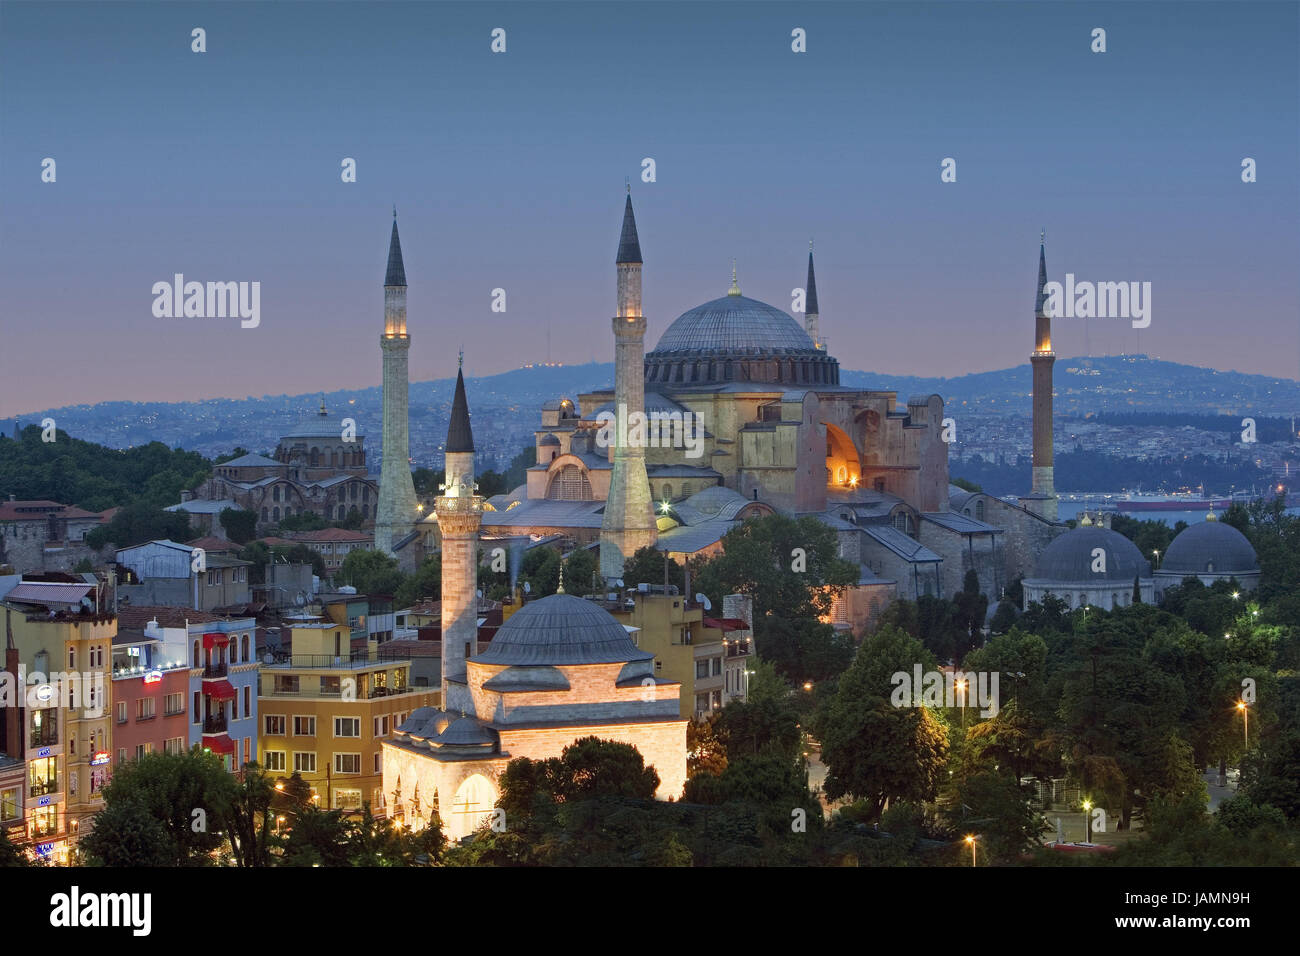 Turkey,Istanbul,town view,Hagia Sophia,Ayasofya museum,lighting,evening,town,city,metropolis,culture,tourism,place of interest,structure,architecture,landmark,historically,UNESCO-world cultural heritage,domes,minarets,evening tuning, Stock Photo